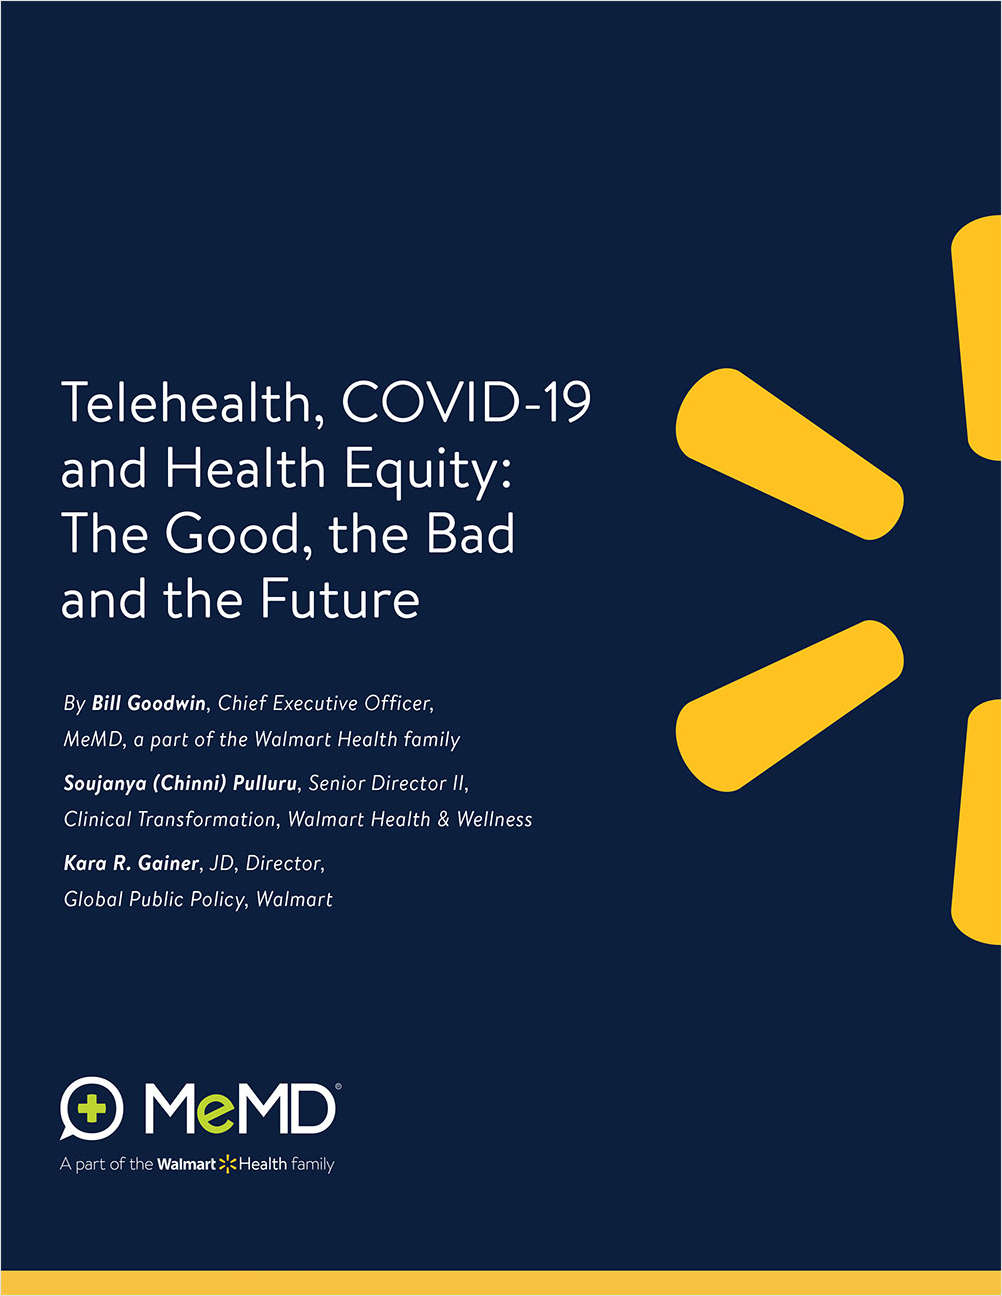 Telehealth, COVID-19 and Health Equity: The Good, the Bad and the Future